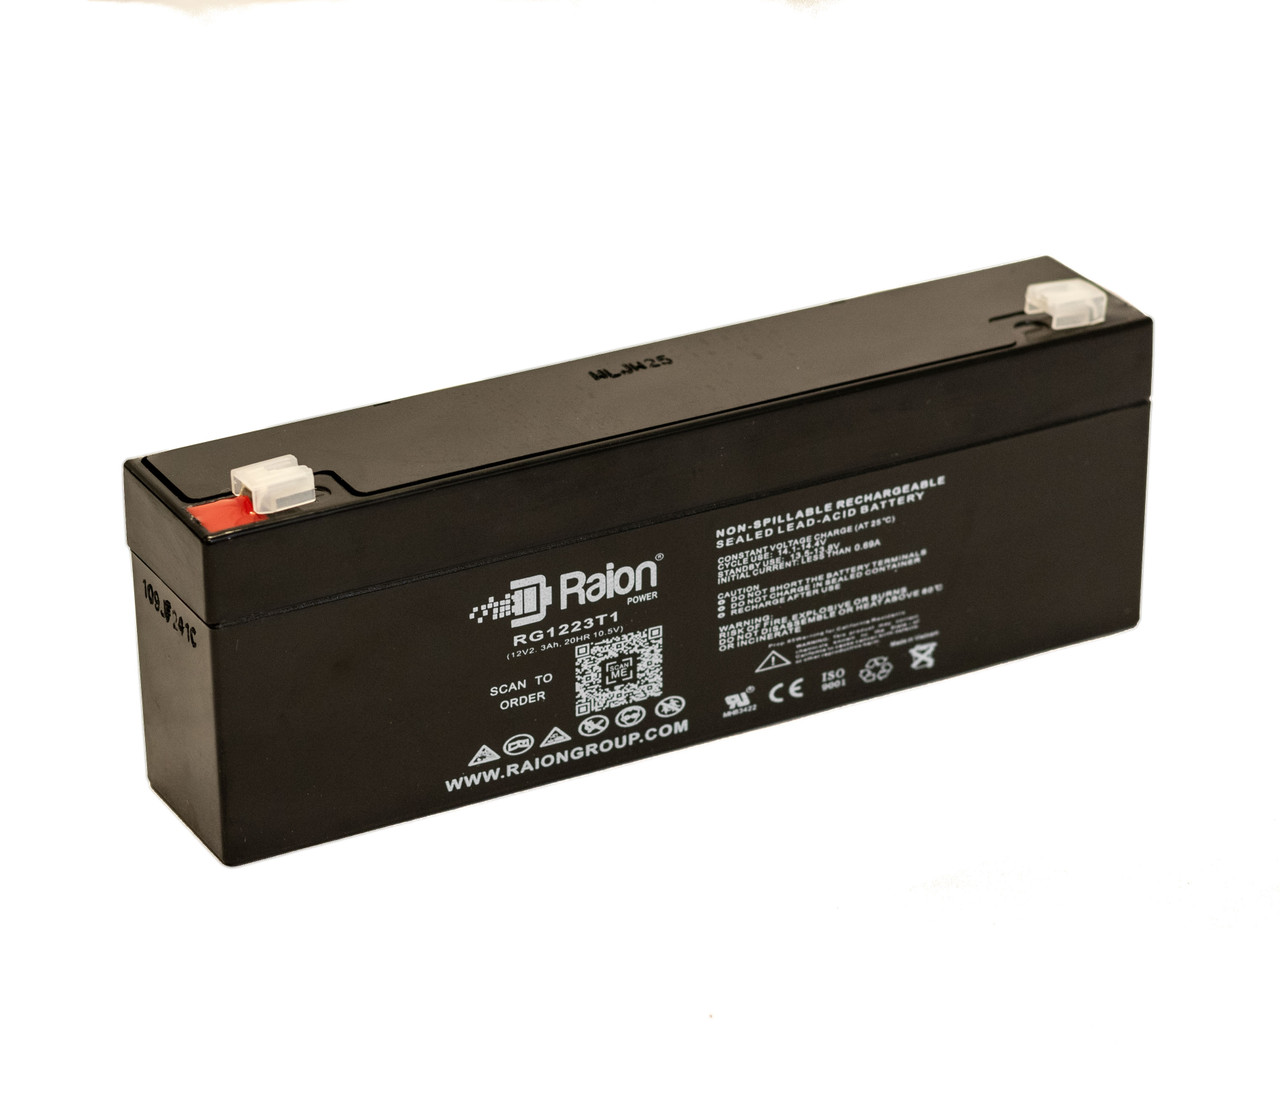 Raion Power RG1223T1 Replacement Battery for Sigmas SP12-2.3